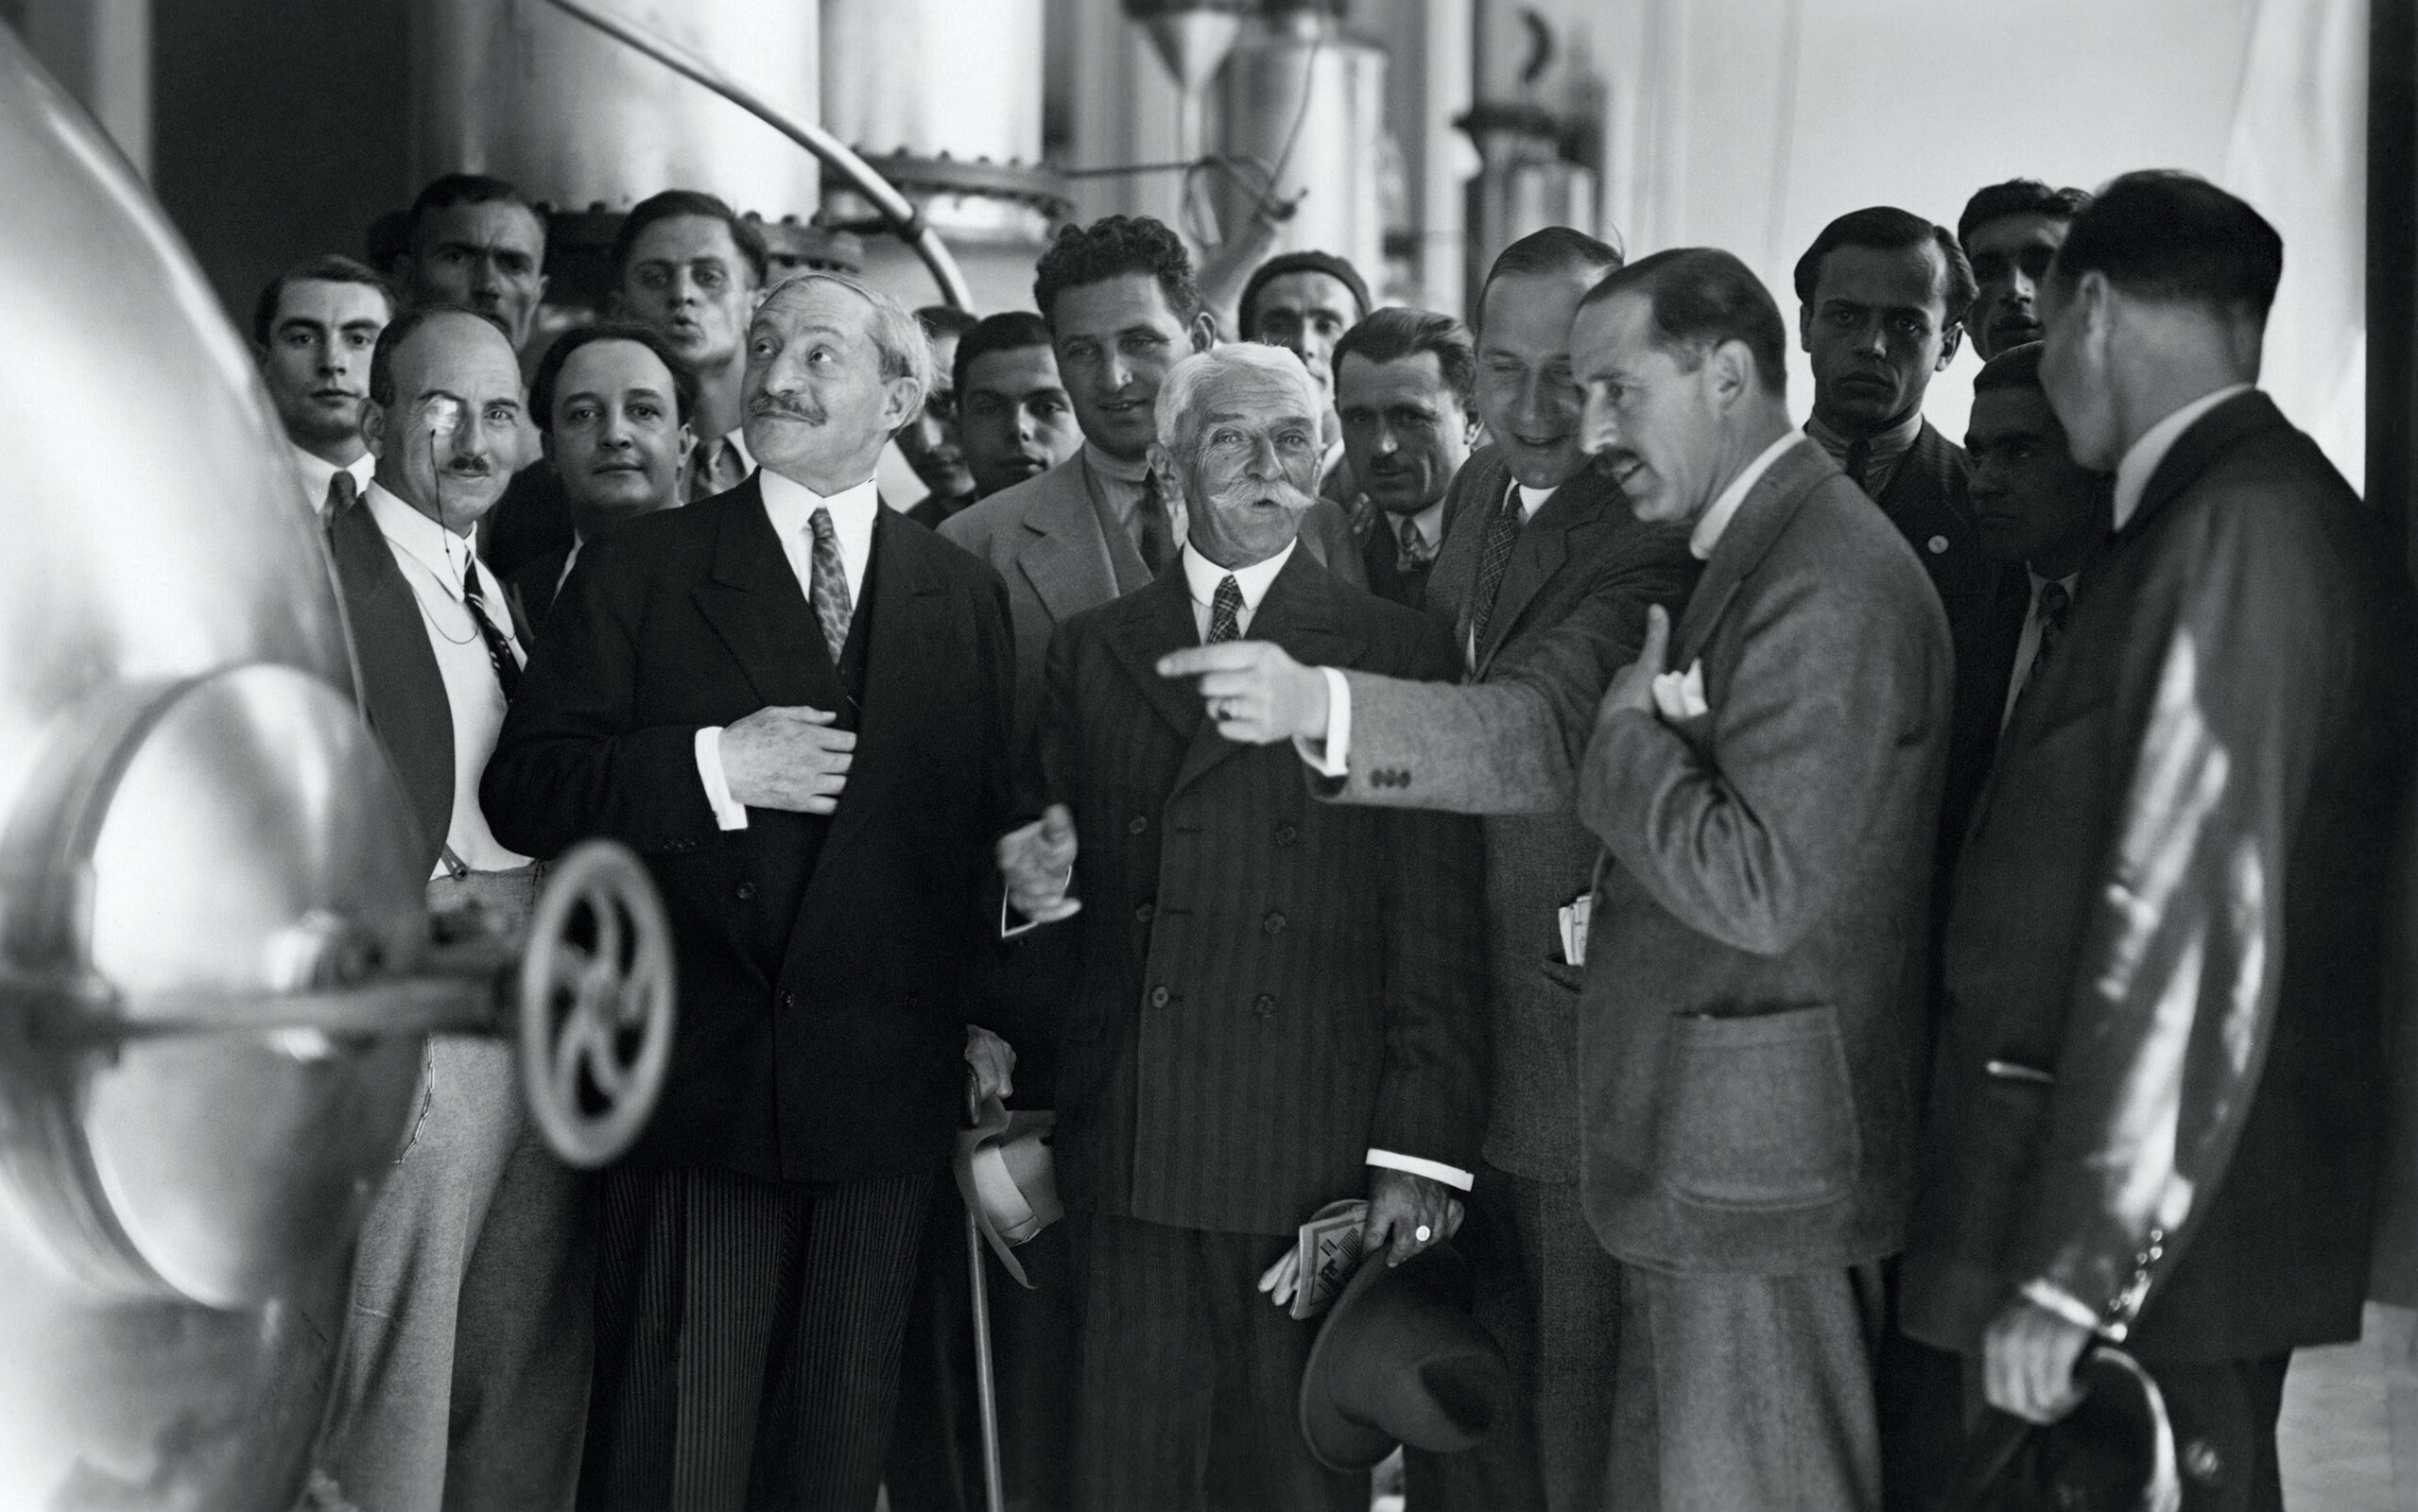 Visit of the Ovomaltine factory, Neuenegg, 1932 - In the center, M. CANELLOPOULOS, the Greek ambassador to Switzerland, Baron Pierre de COUBERTIN and Francis-Marius MESSERLI (from the side), Secretary General of the National Olympic Committee of Switzerland (SUI) surrounded by Greek athletes.